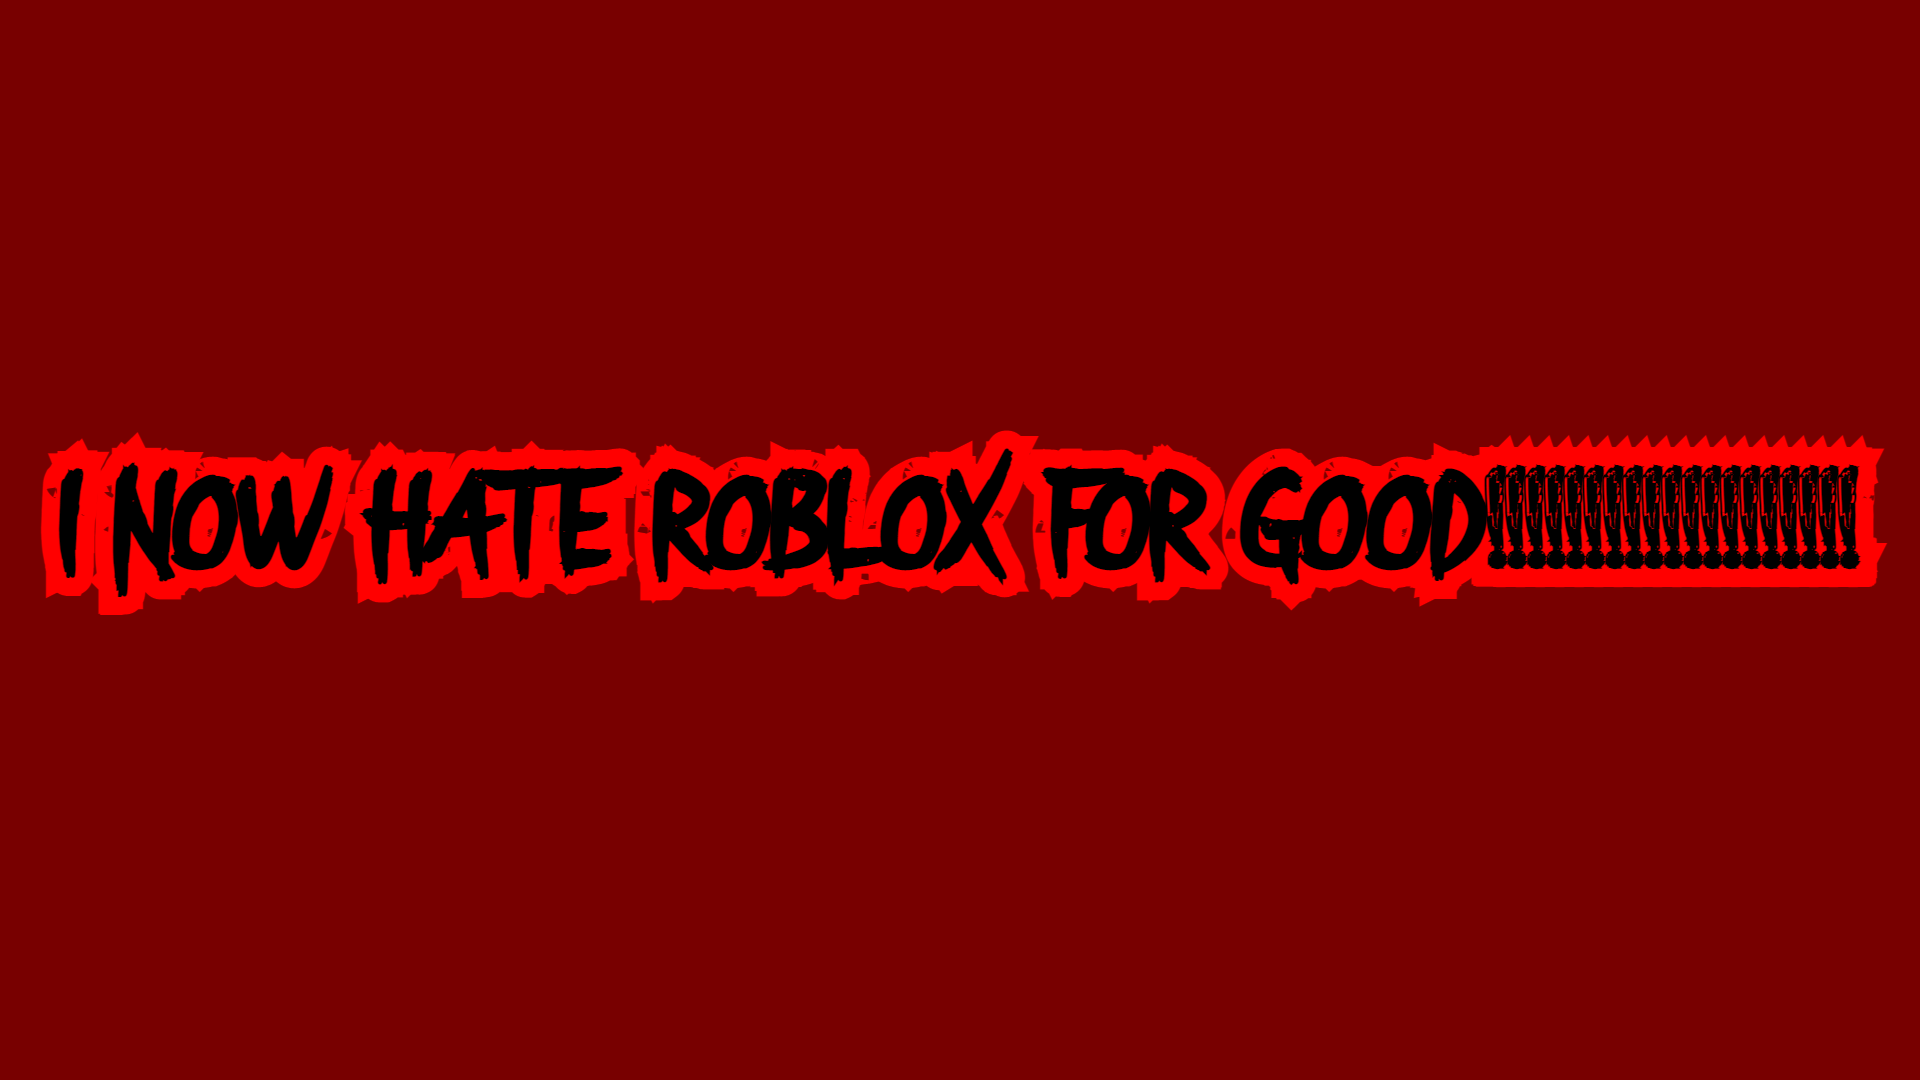 I hate my country : r/roblox